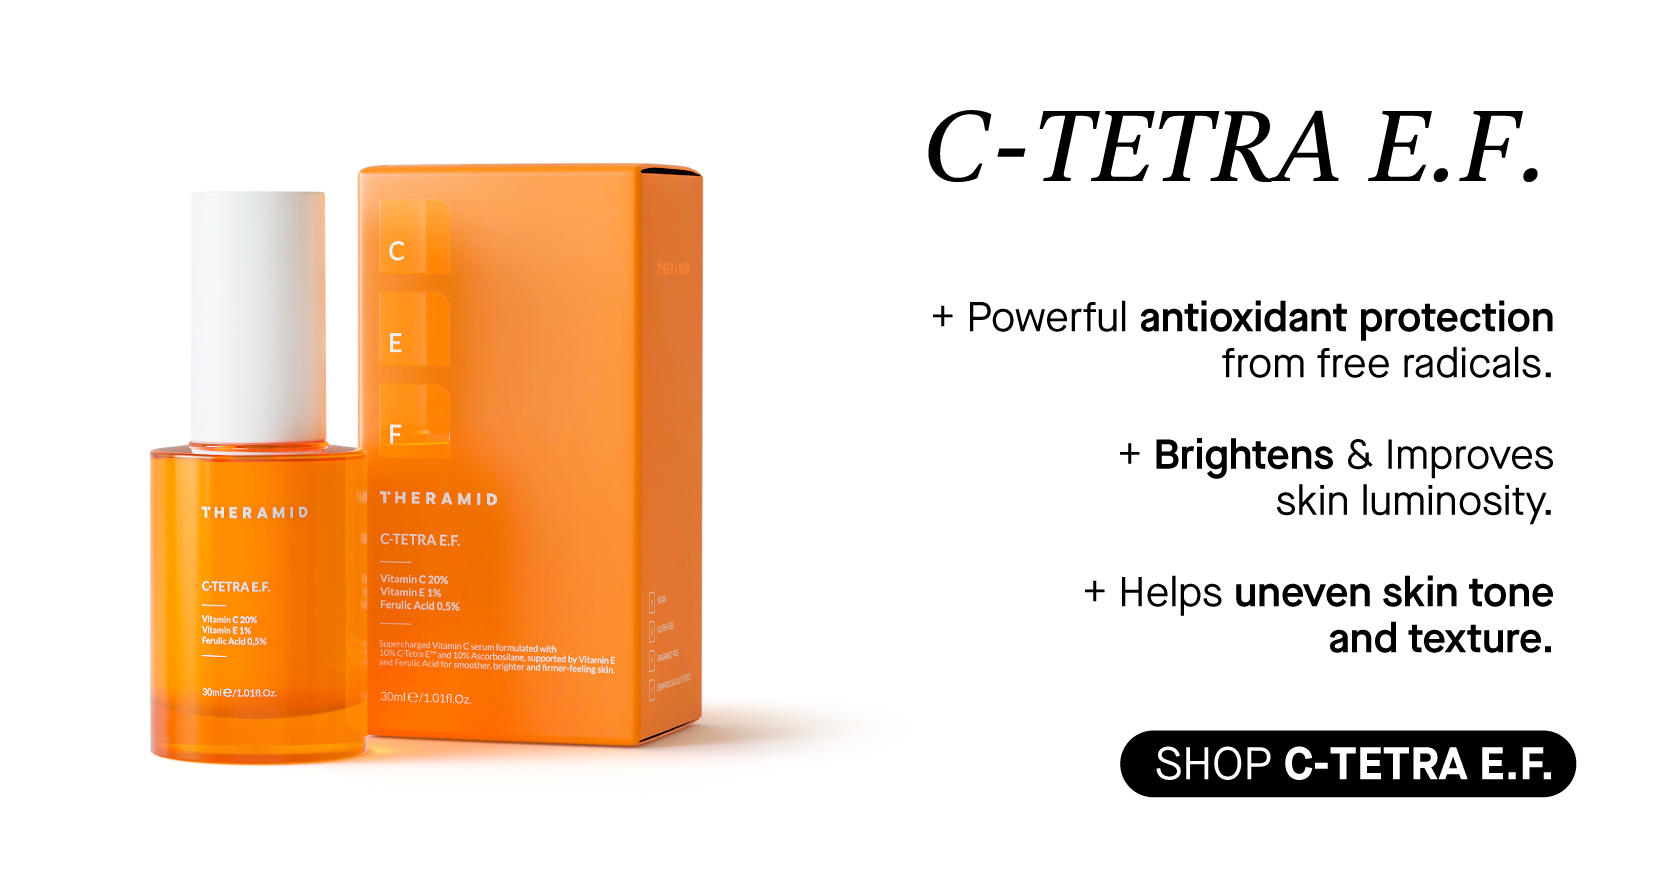 C-TETRA E.F. Powerful antioxidant protection from free radicals. Brightens Improves RN skin luminosity. CTETRAEF. Helps uneven skin tone and texture. SHOP C-TETRAE.F. 